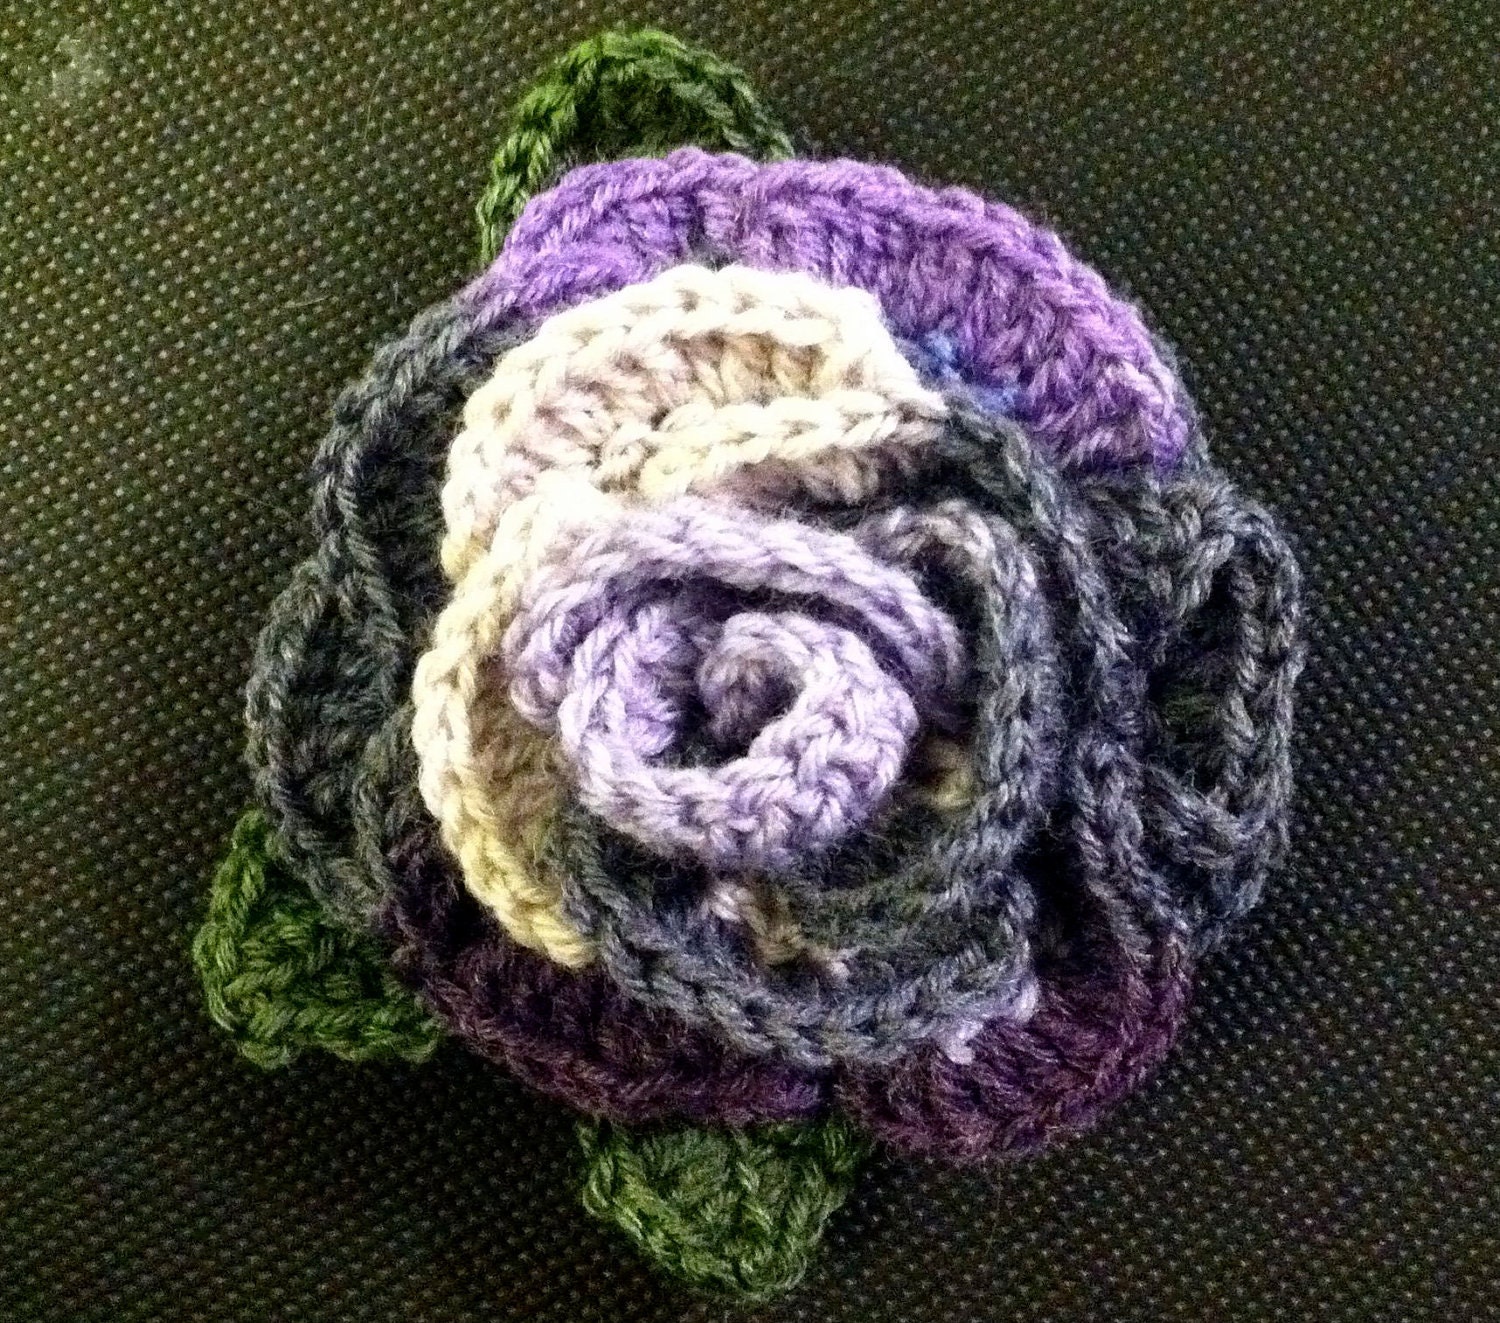 Purple & gray crochet rose pin to raise money for Cystic Fibrosis research - Bexterdesigns